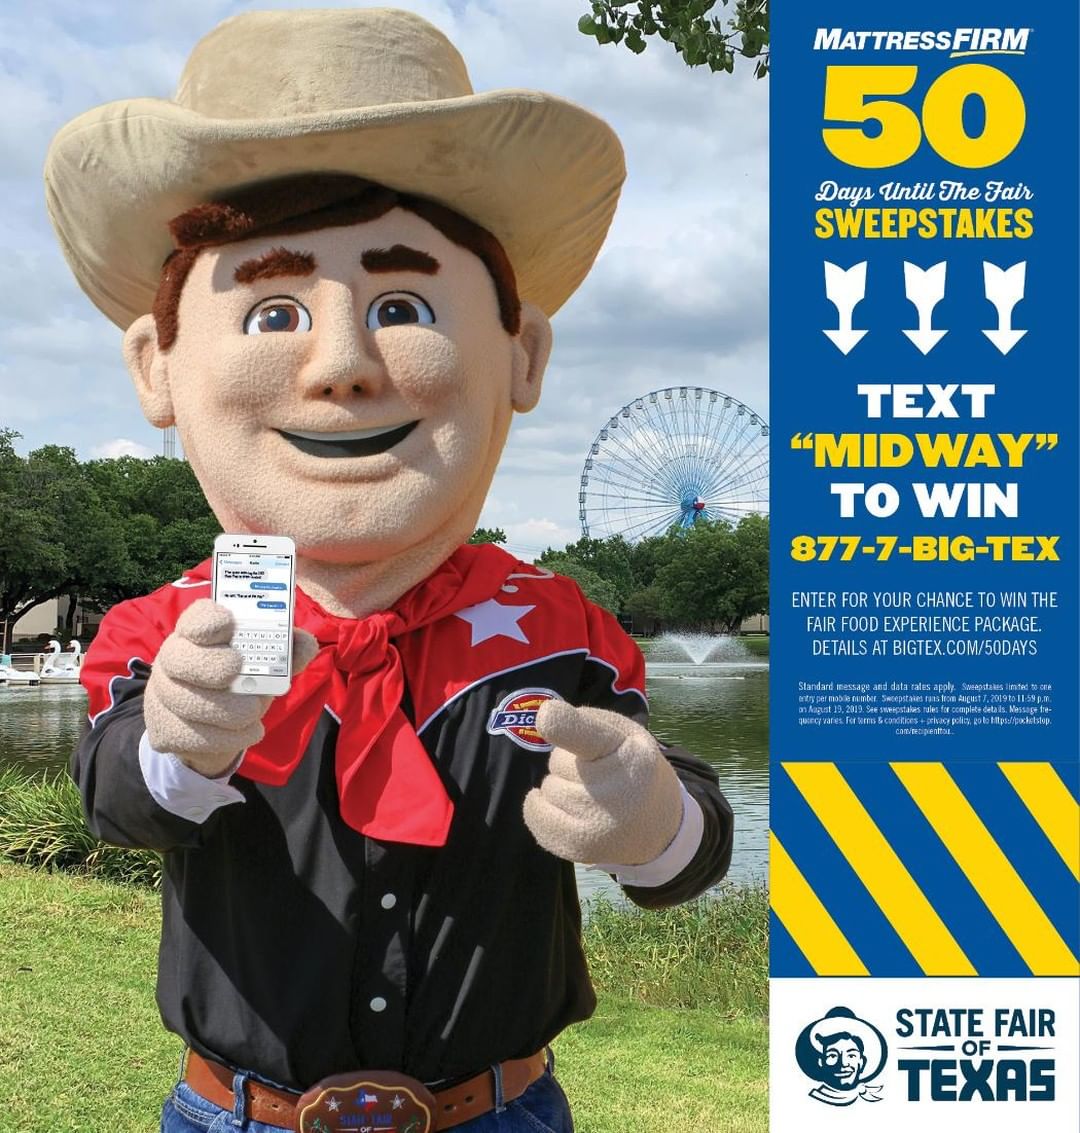 Big Tex & our friends at @MattressFirm have put together the STATE FAIR FOODIE EXPERIENCE package! 😋🍴😍 Prize pack includes 2 tix to the Big Tex Choice Awards, 2 Season Passes, 3 one-day parking pass, $200 in food & ride Coupons, State Fair Swag! #BigTex https://bit.ly/2GRtbBx